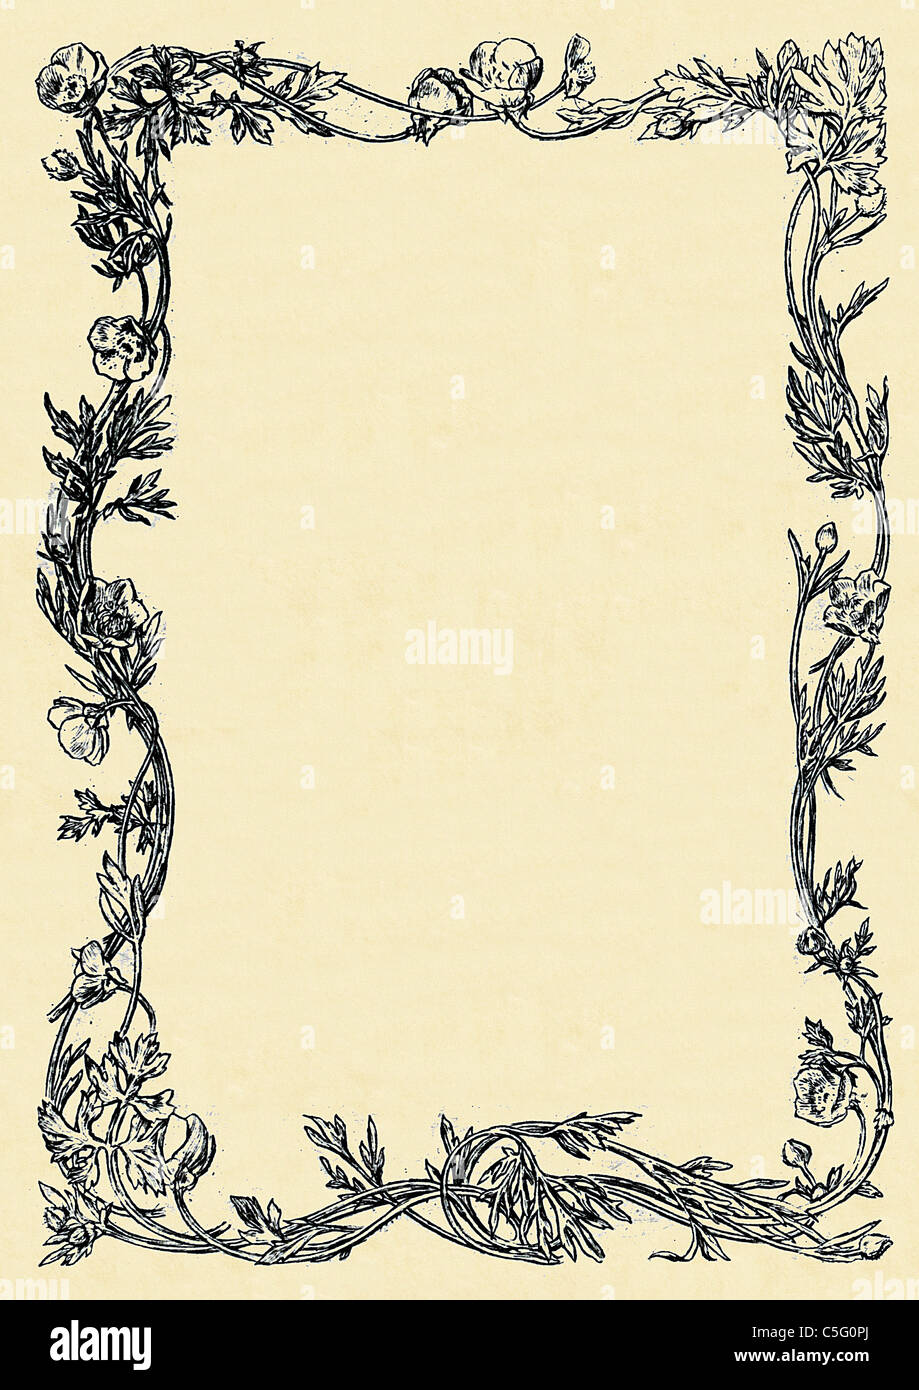 Vintage Decorative Border Design #5 from an antiquarian book illustration Stock Photo